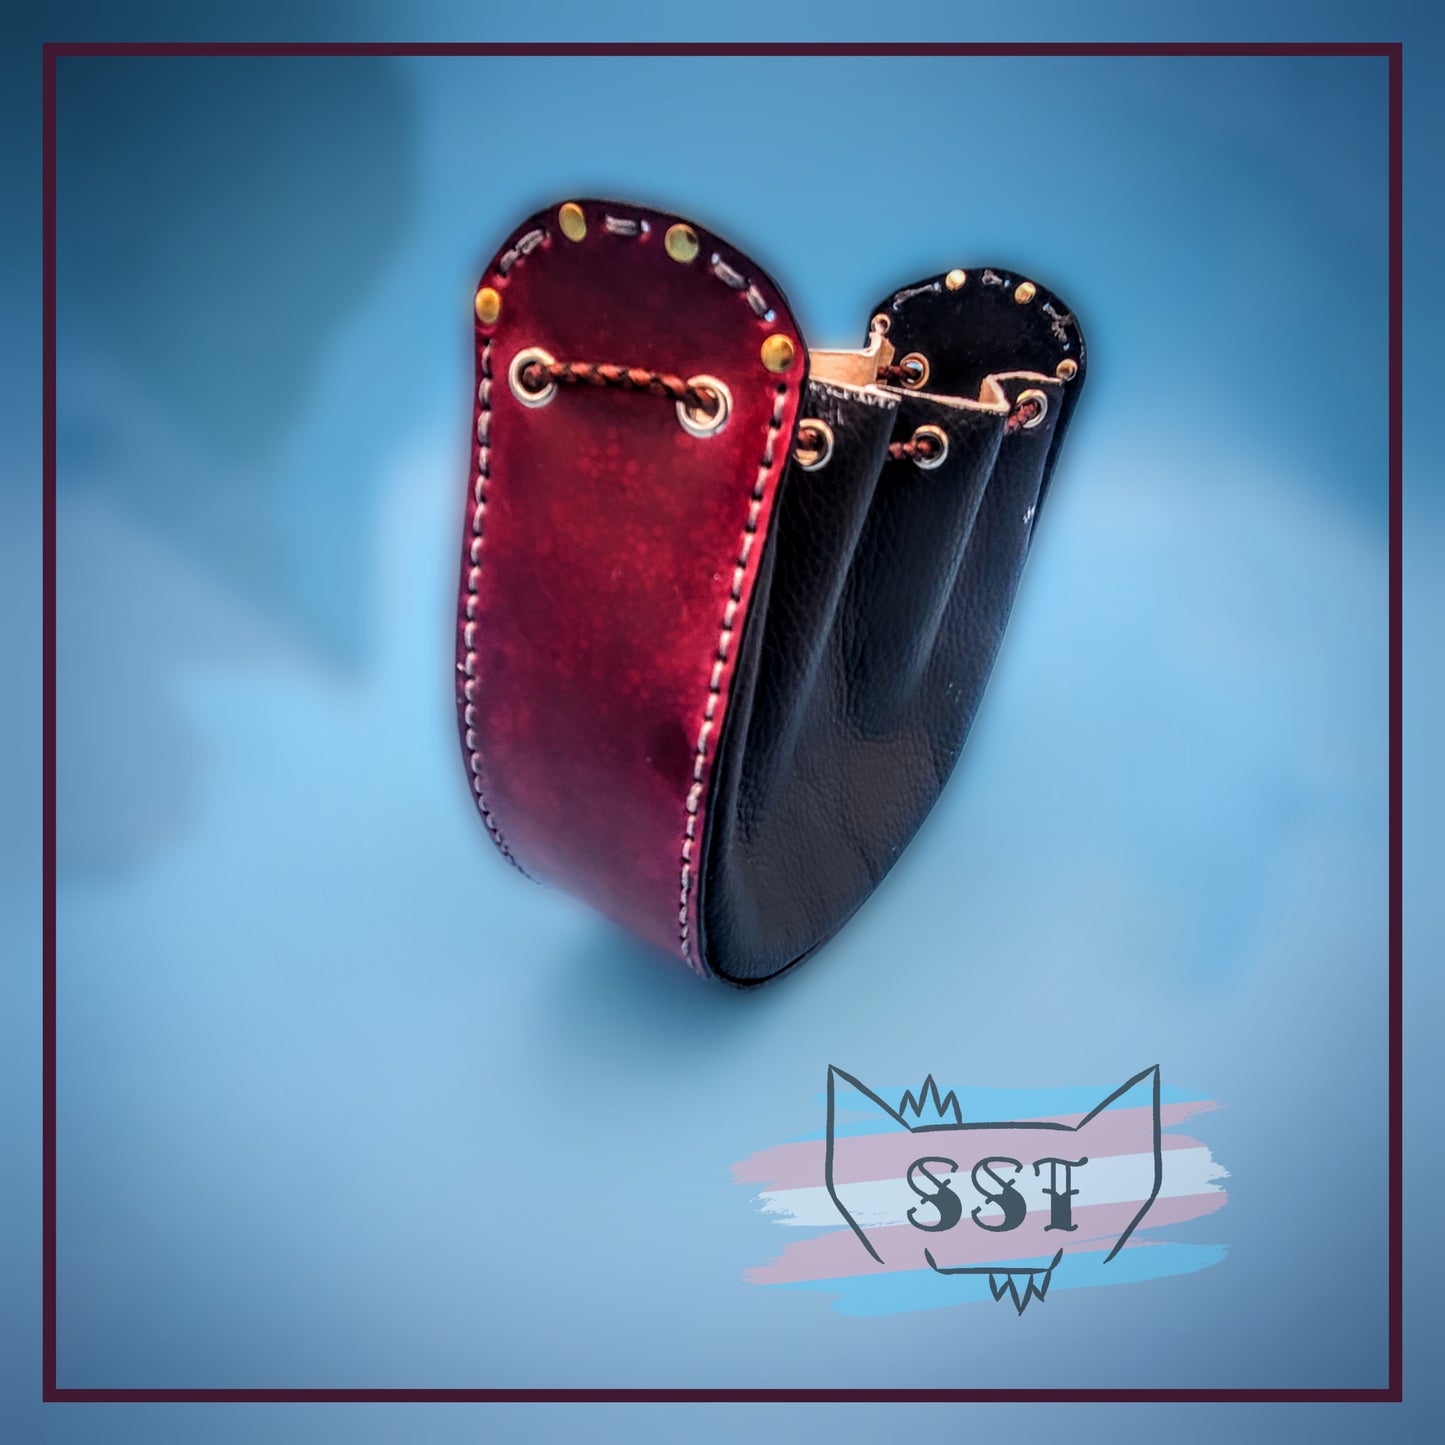 Coin Purse - Red